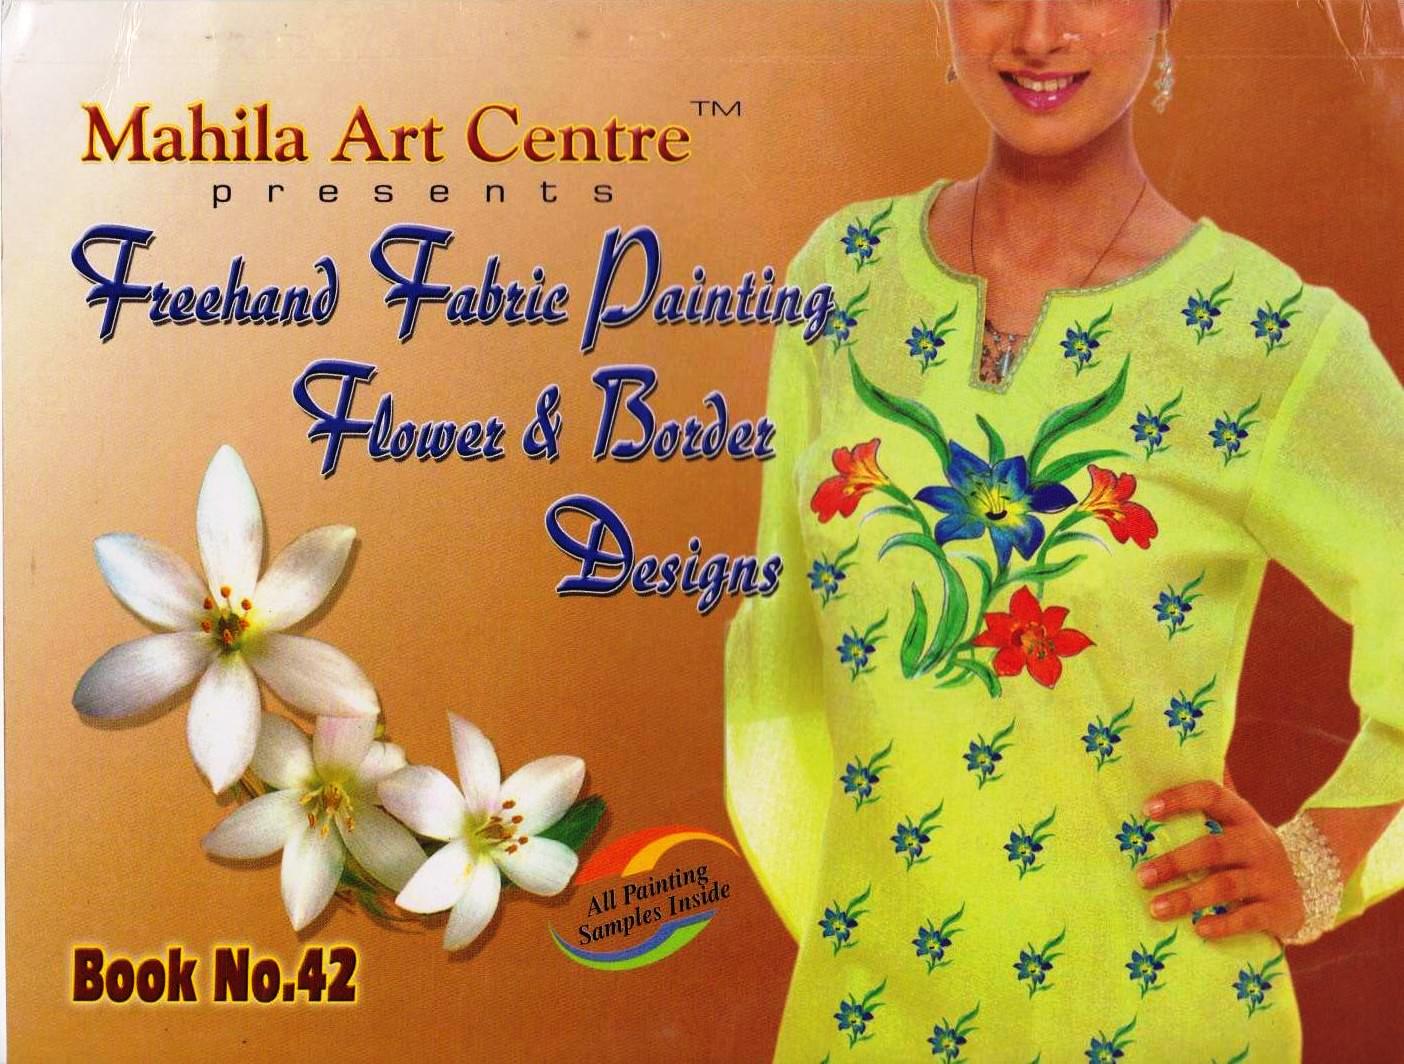 free-hand-fabric-painting-flowers-border-designs-book-no-42